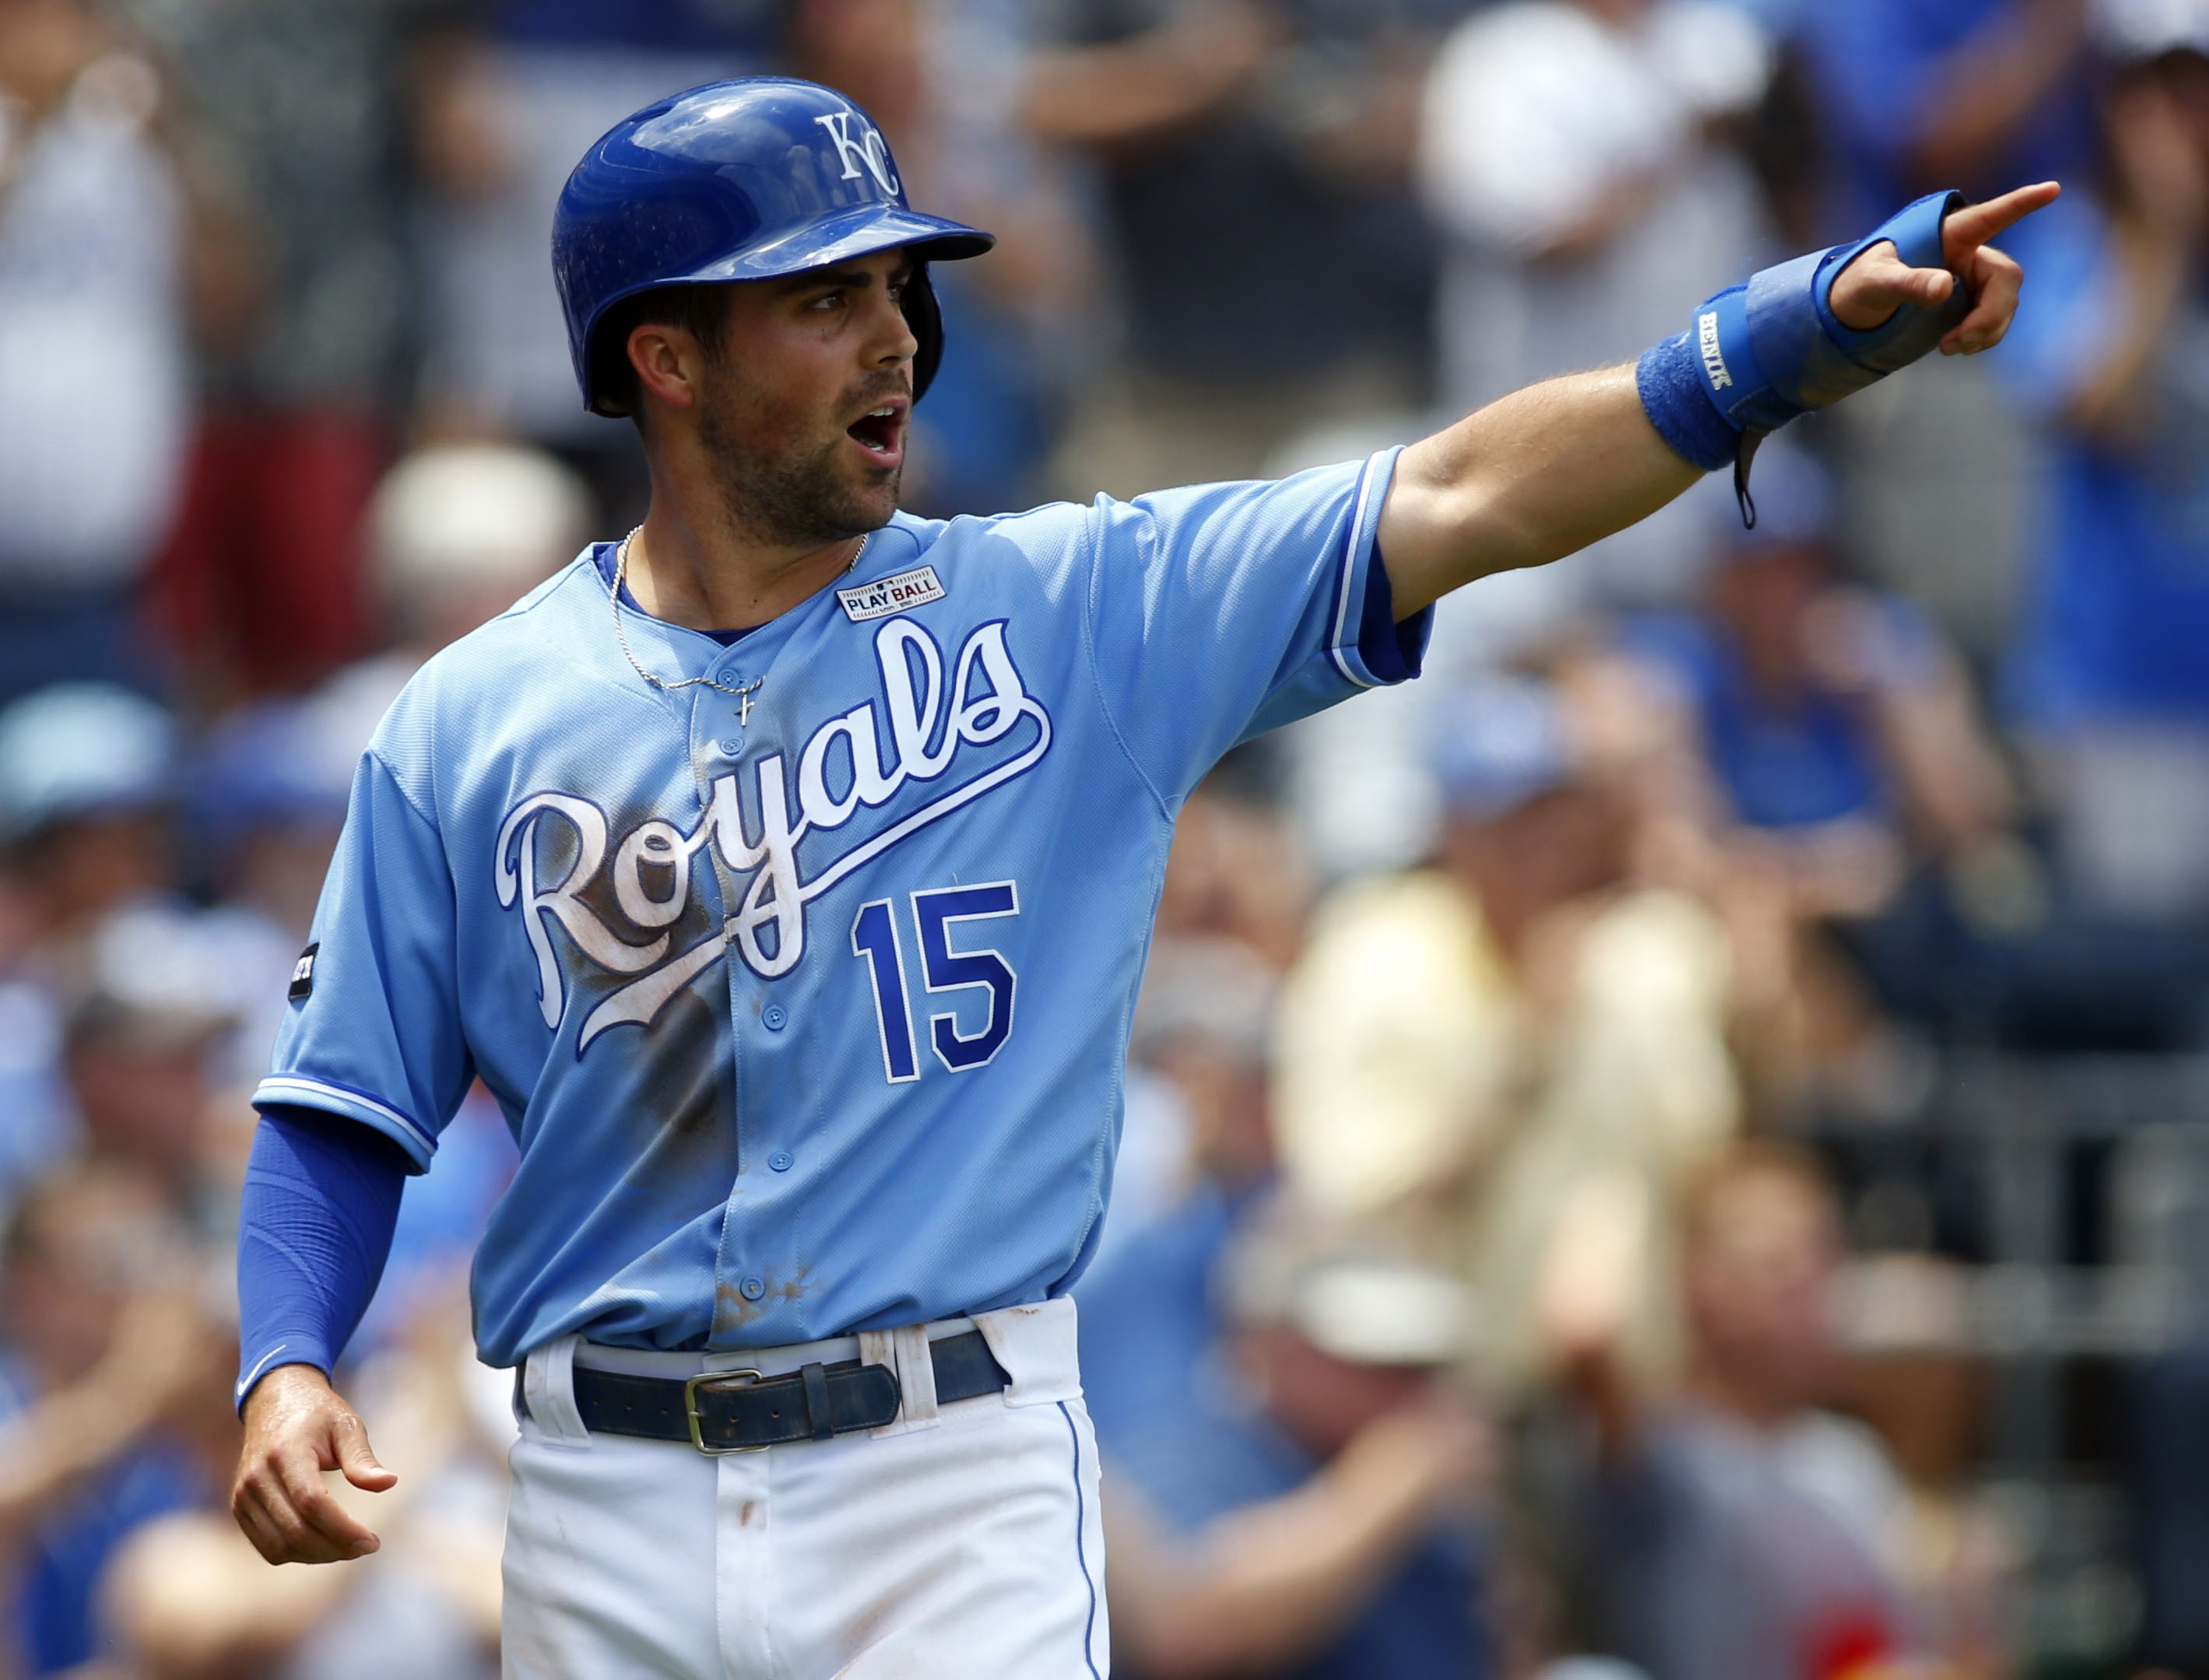 Is the KC Royals Whit Merrifield still just a utility player?